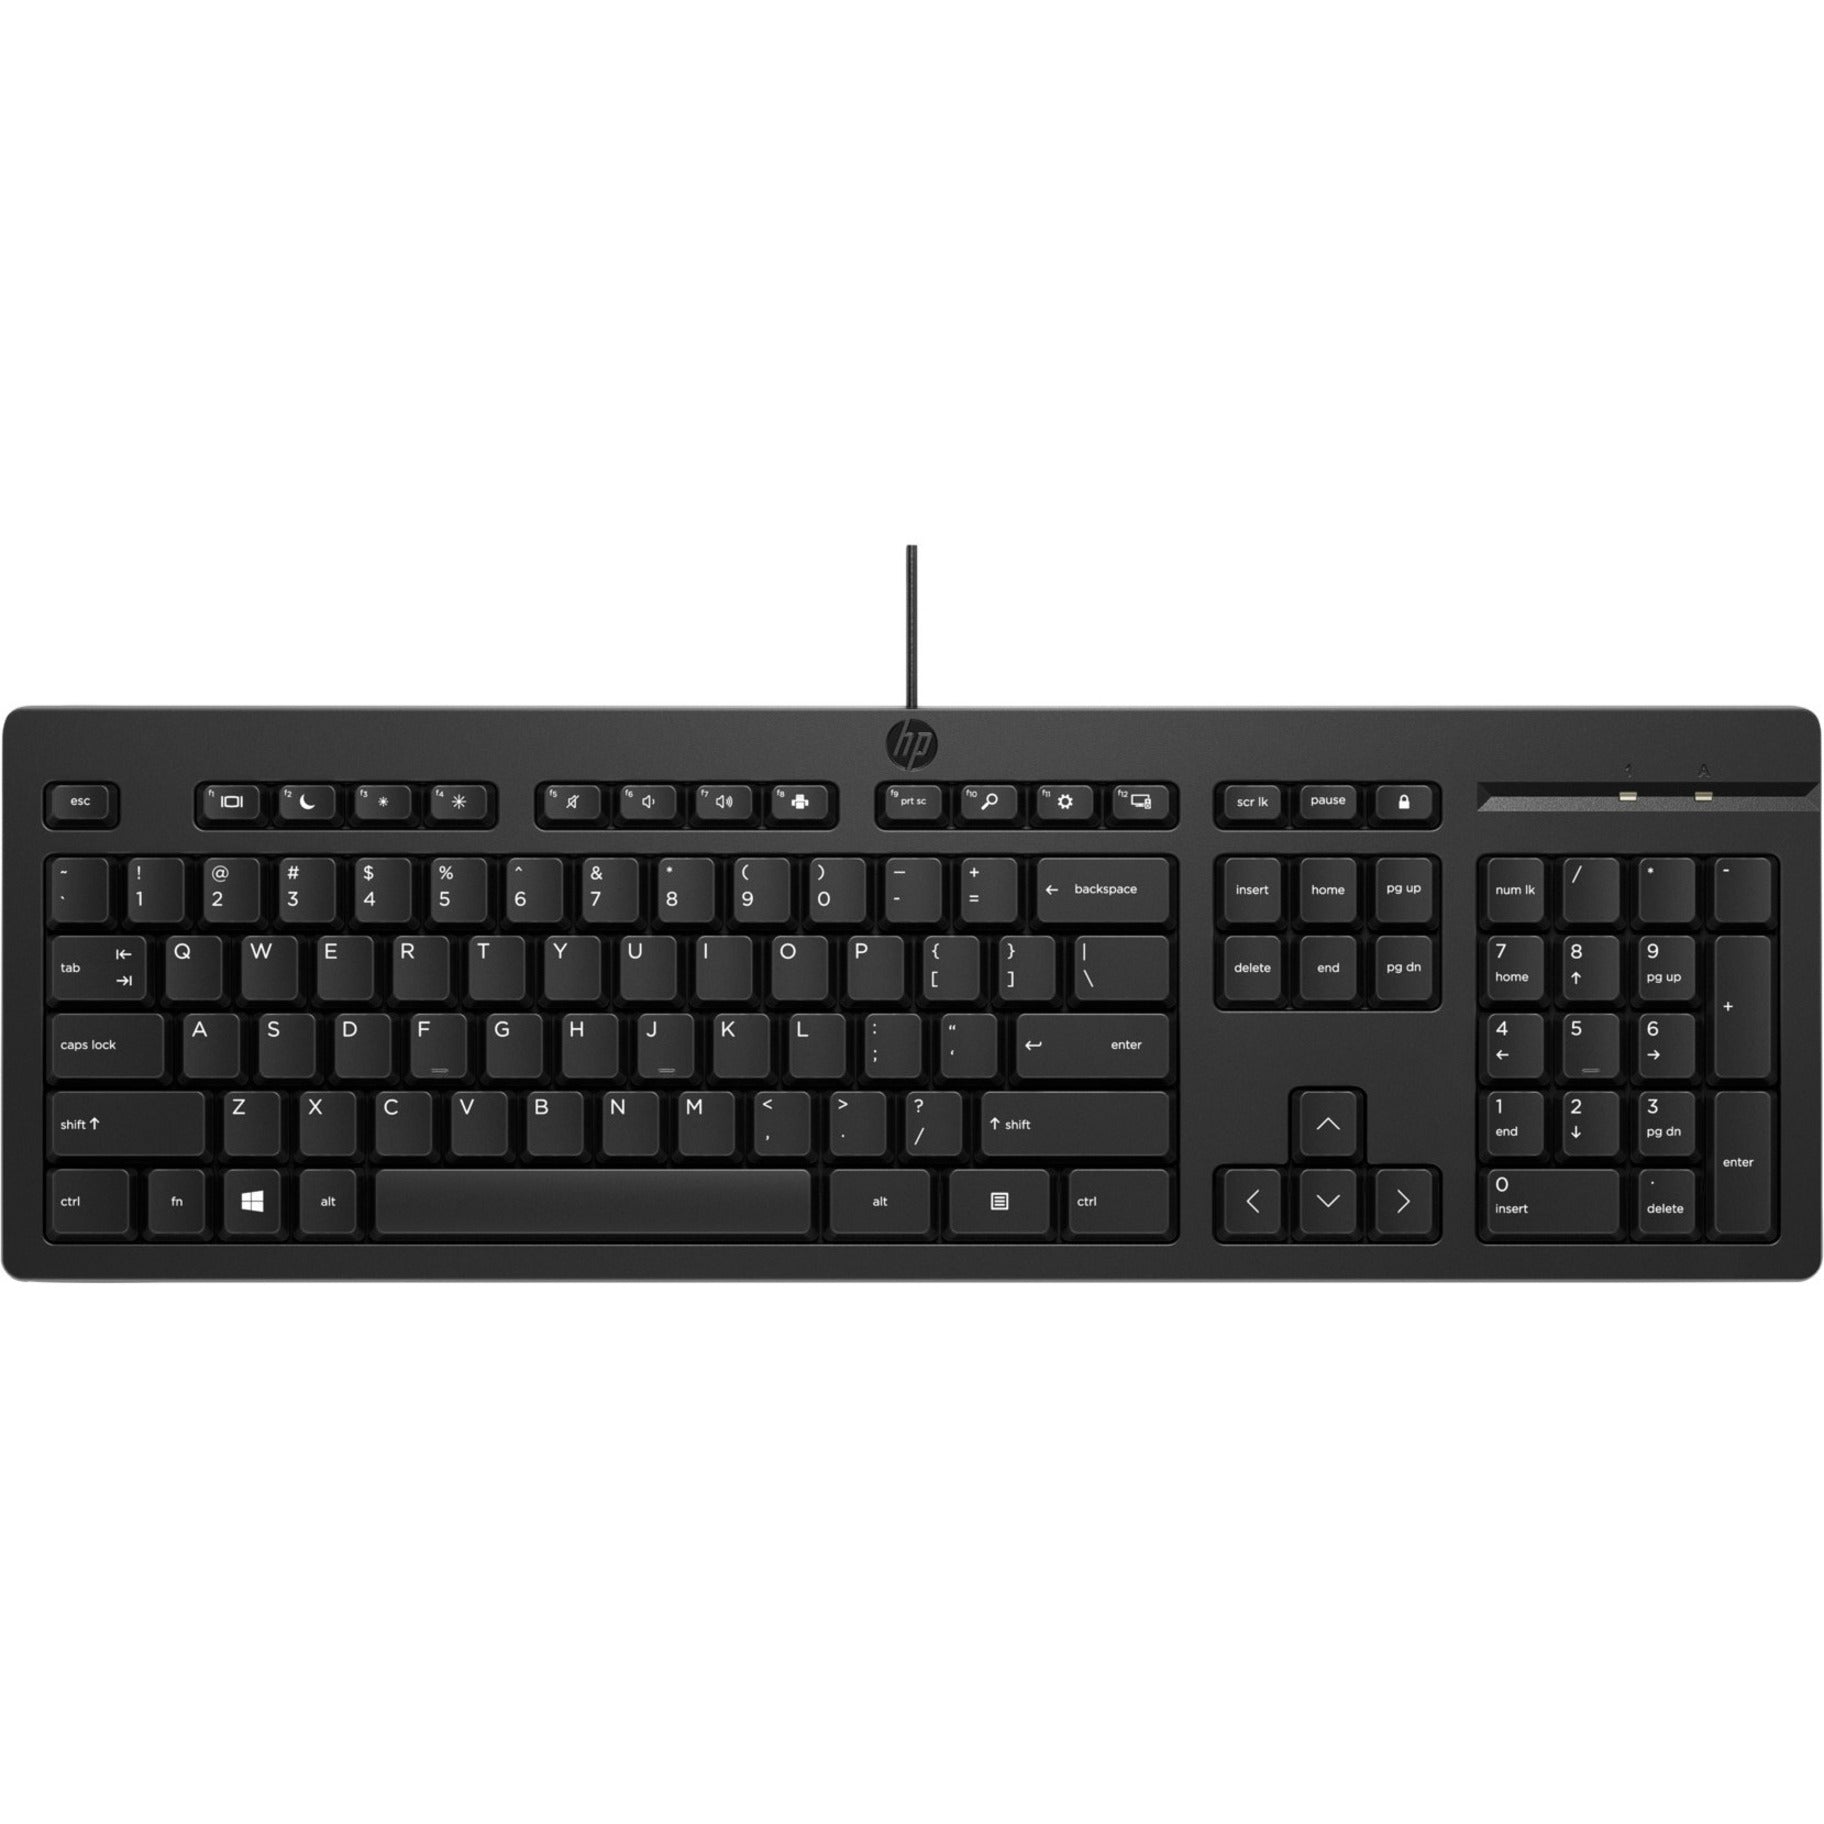 HP 125 Wired Keyboard, Plug and Play, LED Indicator, Adjustable Height